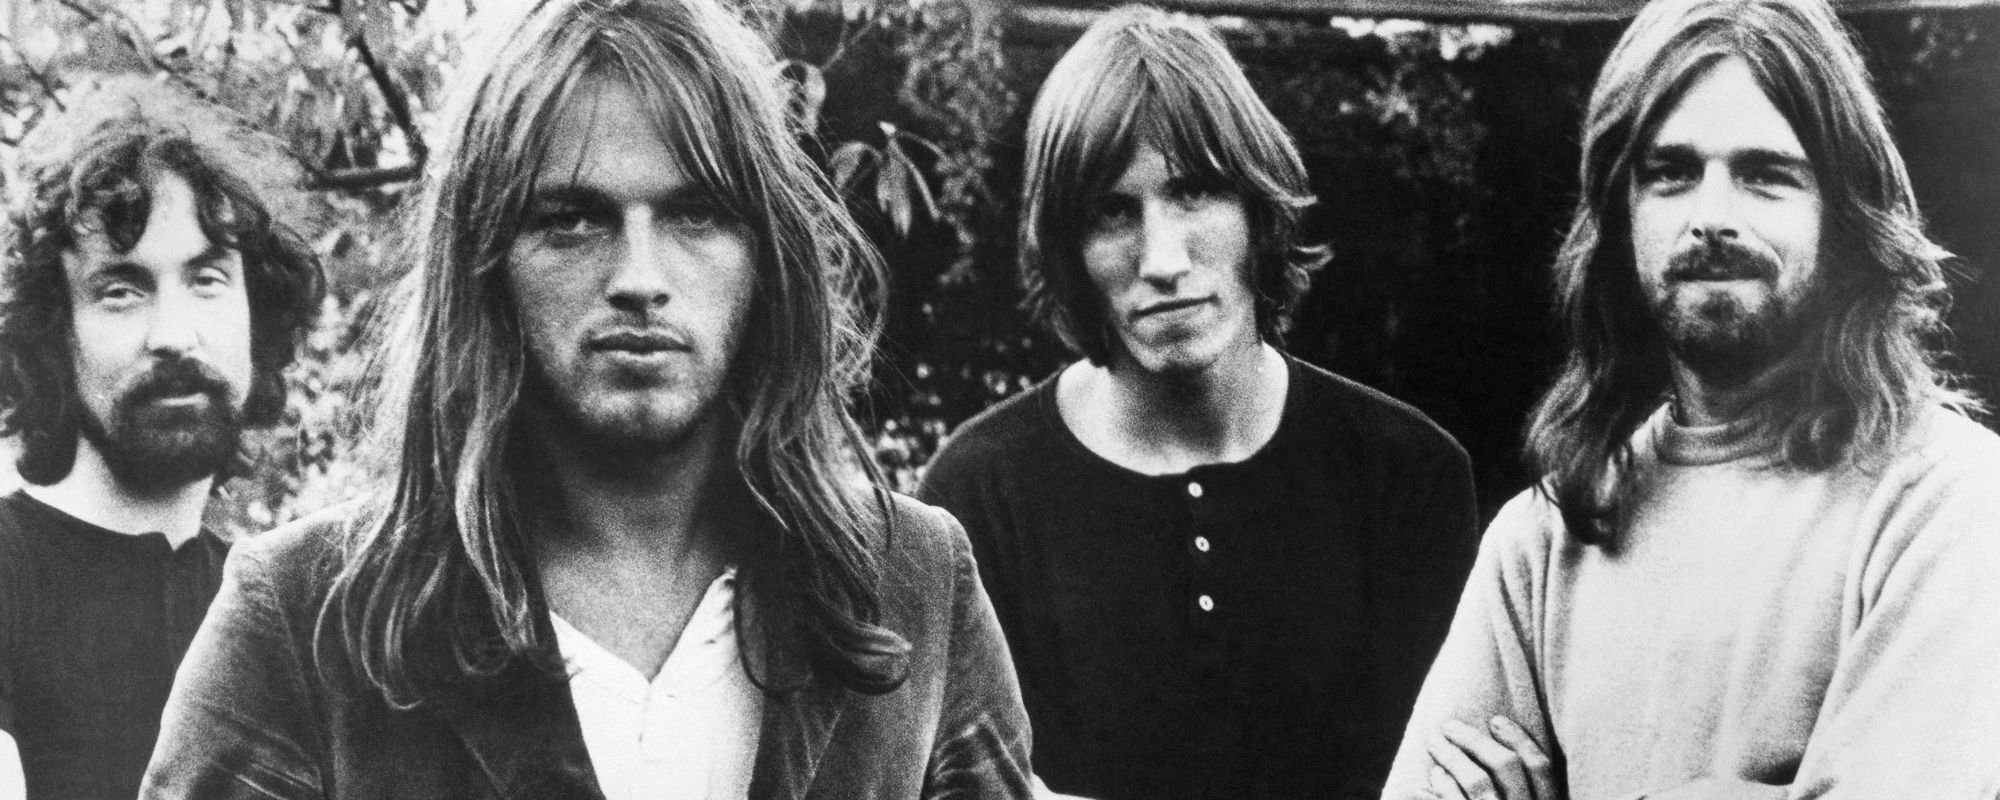 5 Pink Floyd Songs That Describe The Band’s Struggle With Fame